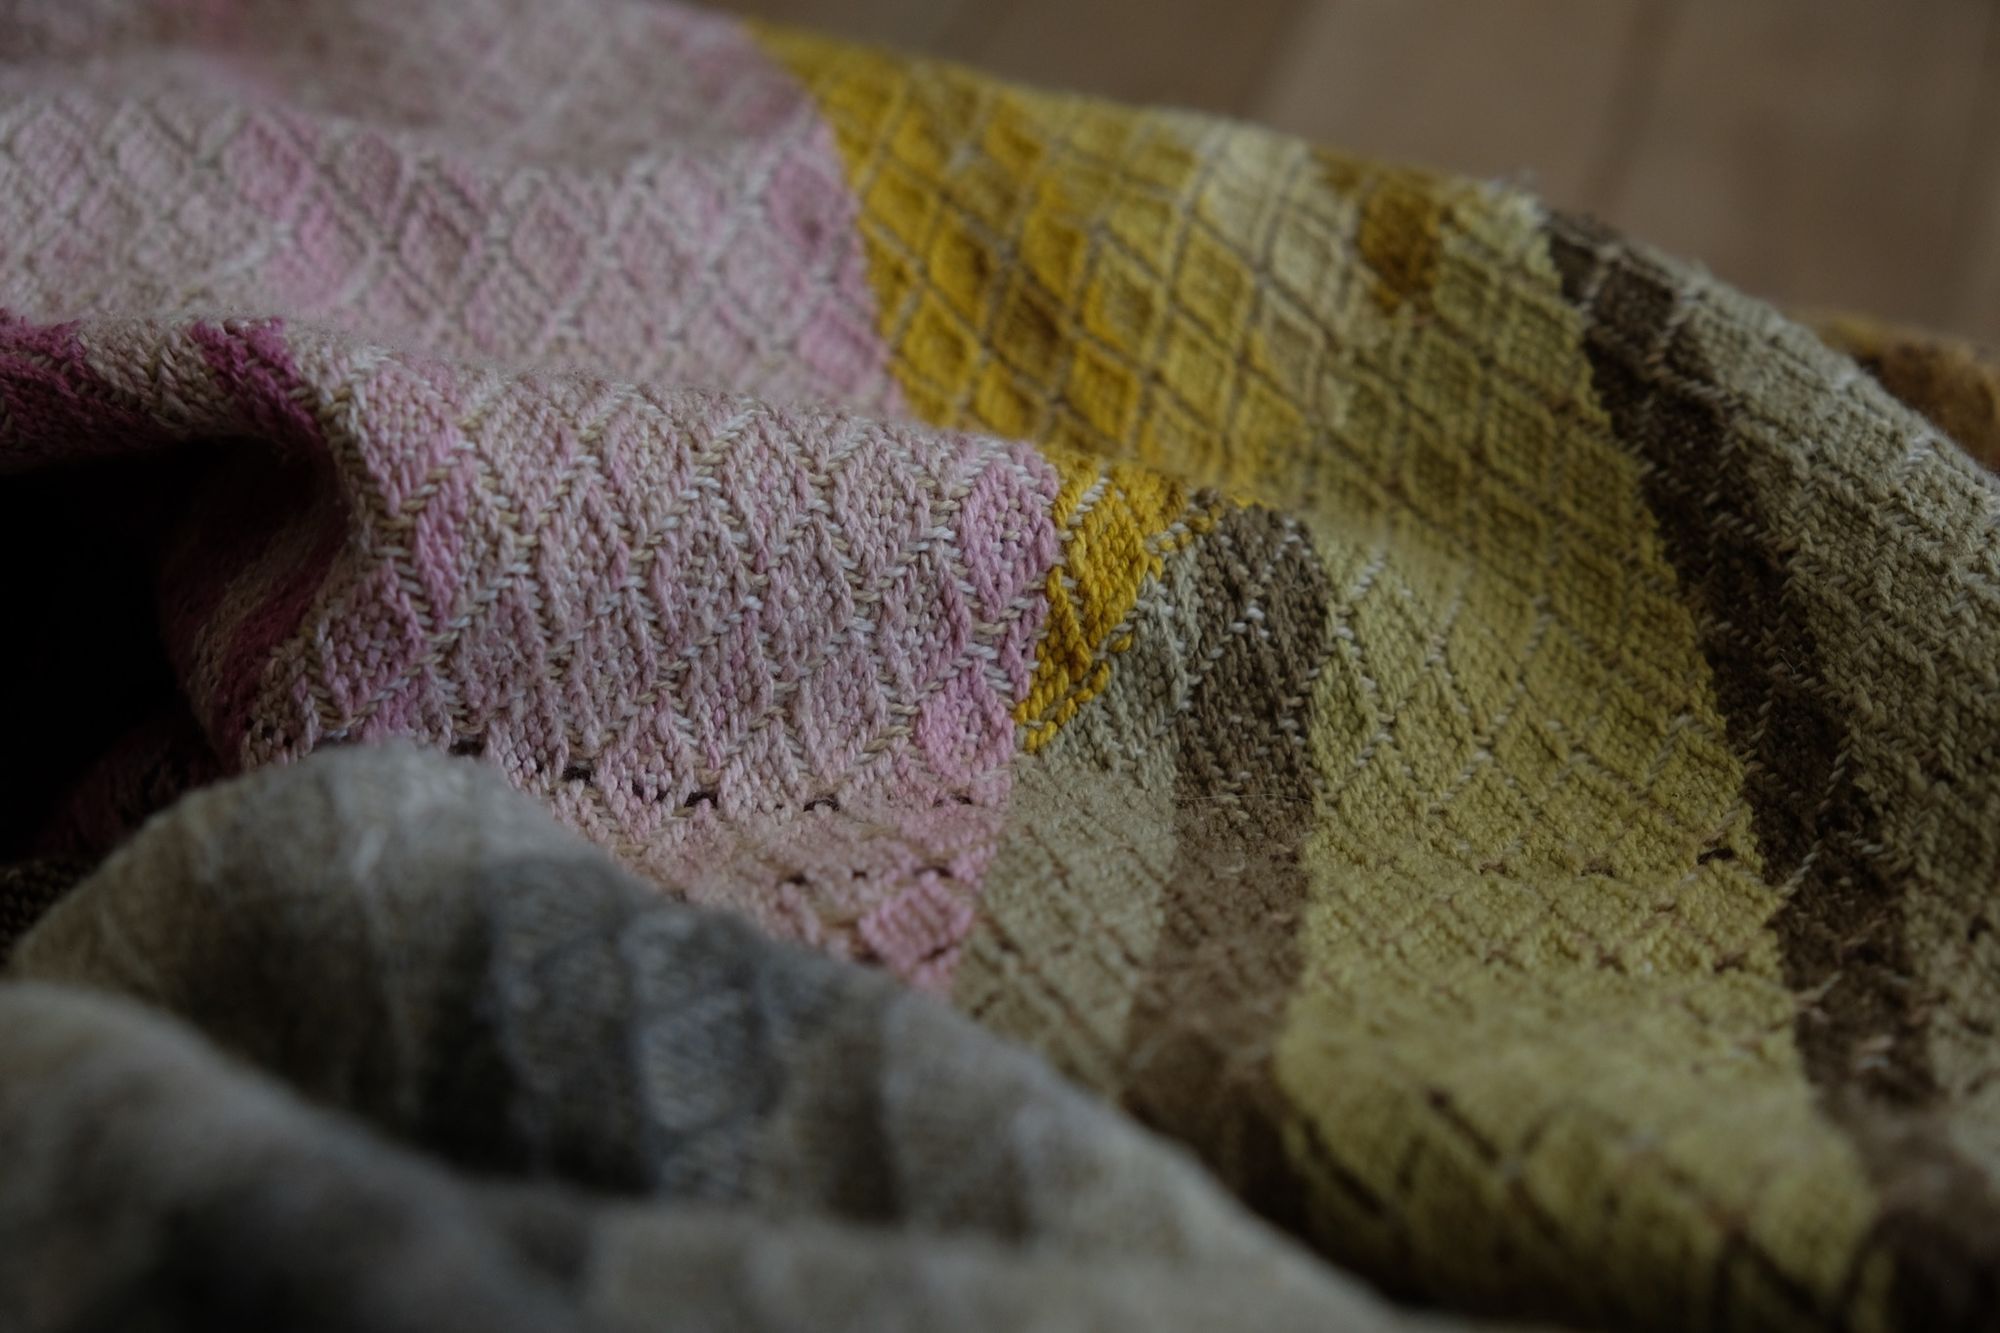 detail of A long length of handwoven fabric with a diamond pattern in a naturally dyed rainbow of color, brown, grey, pink, purple, yellow, green, orange and lavender lays on a wooden floor